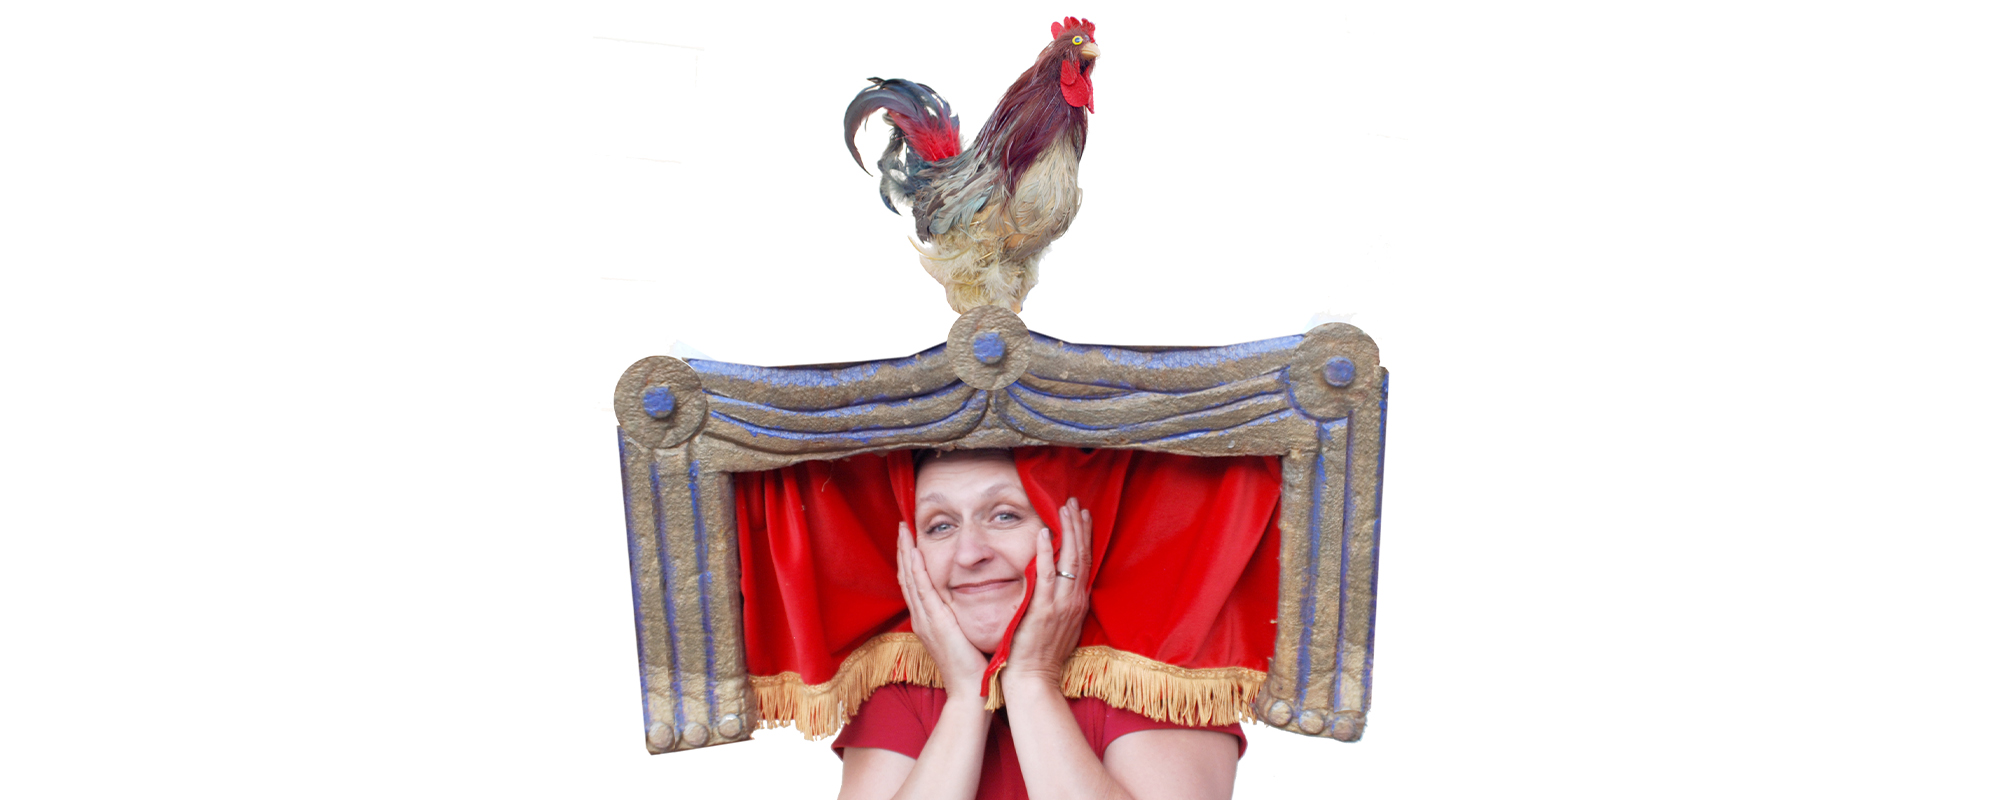 Woman wearing a hat that looks like a stage complete with red curtain and a rooster sitting on top of the stage